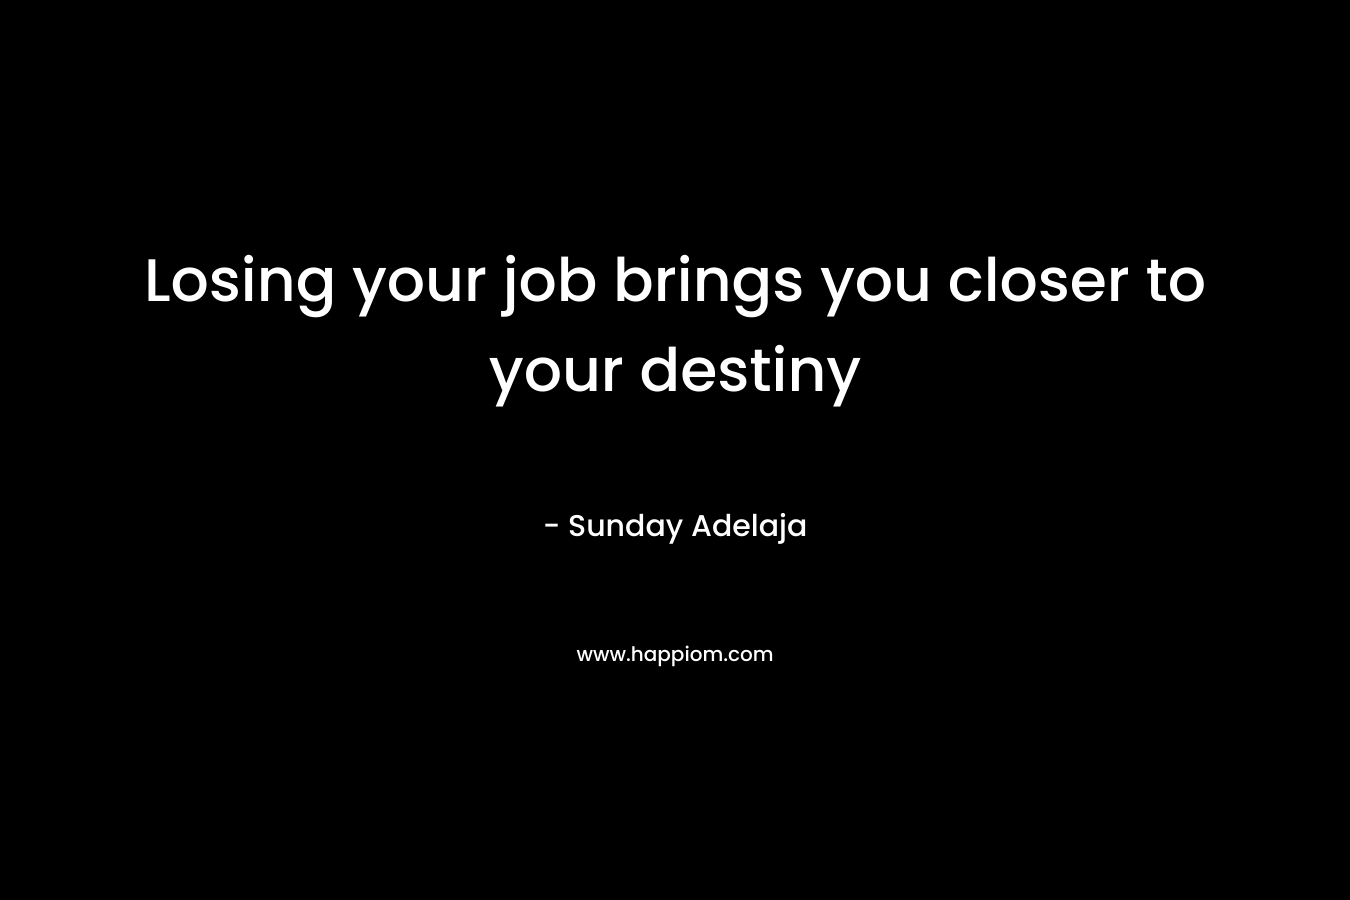 Losing your job brings you closer to your destiny